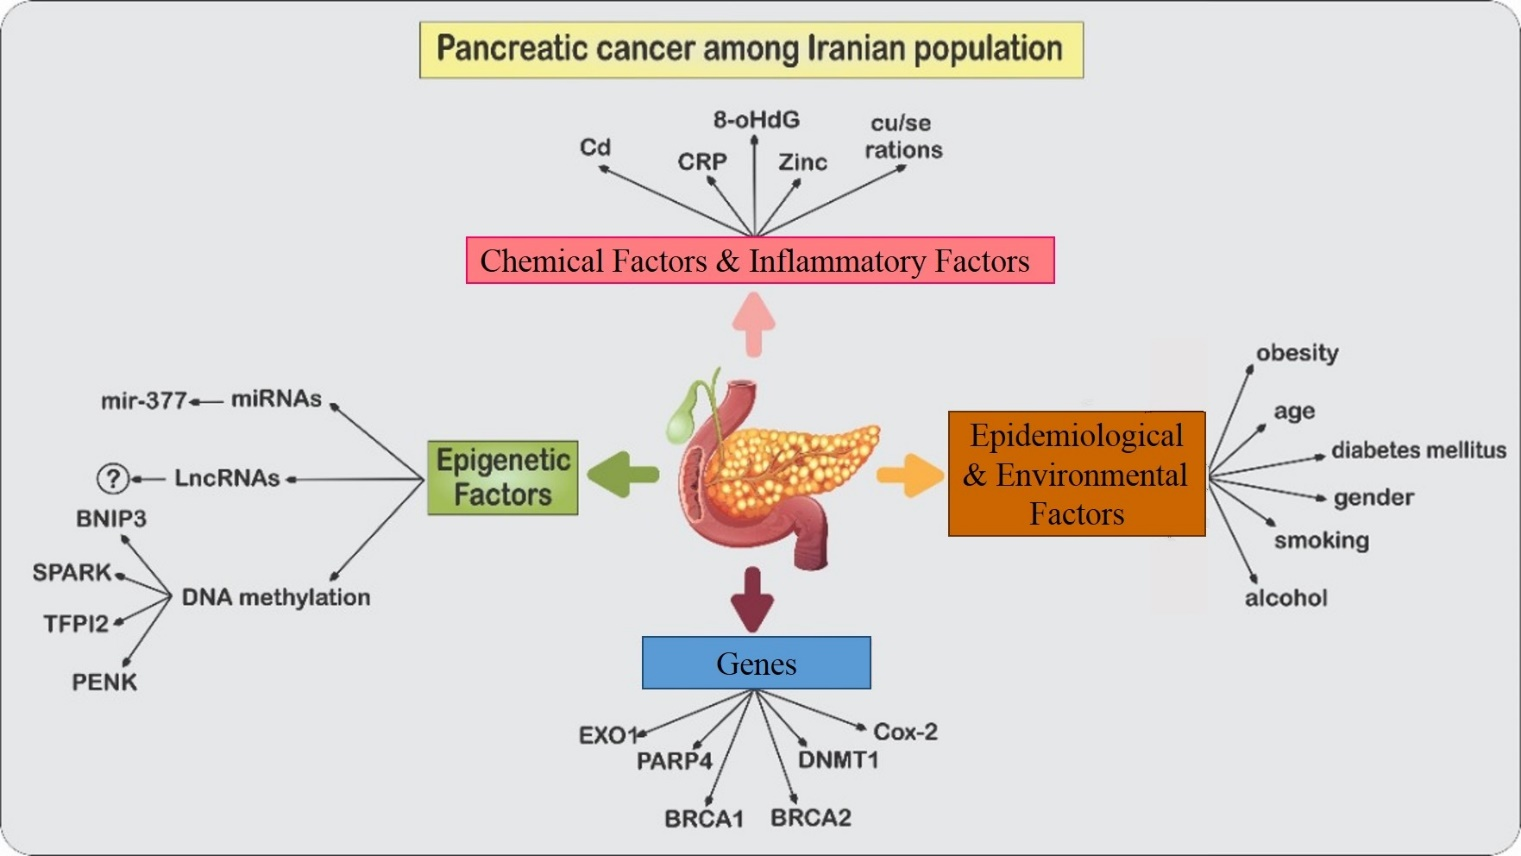 Different genetic, epigenetic, chemical and environmental factors involved in pancreatic cancer progression among Iranian cases.